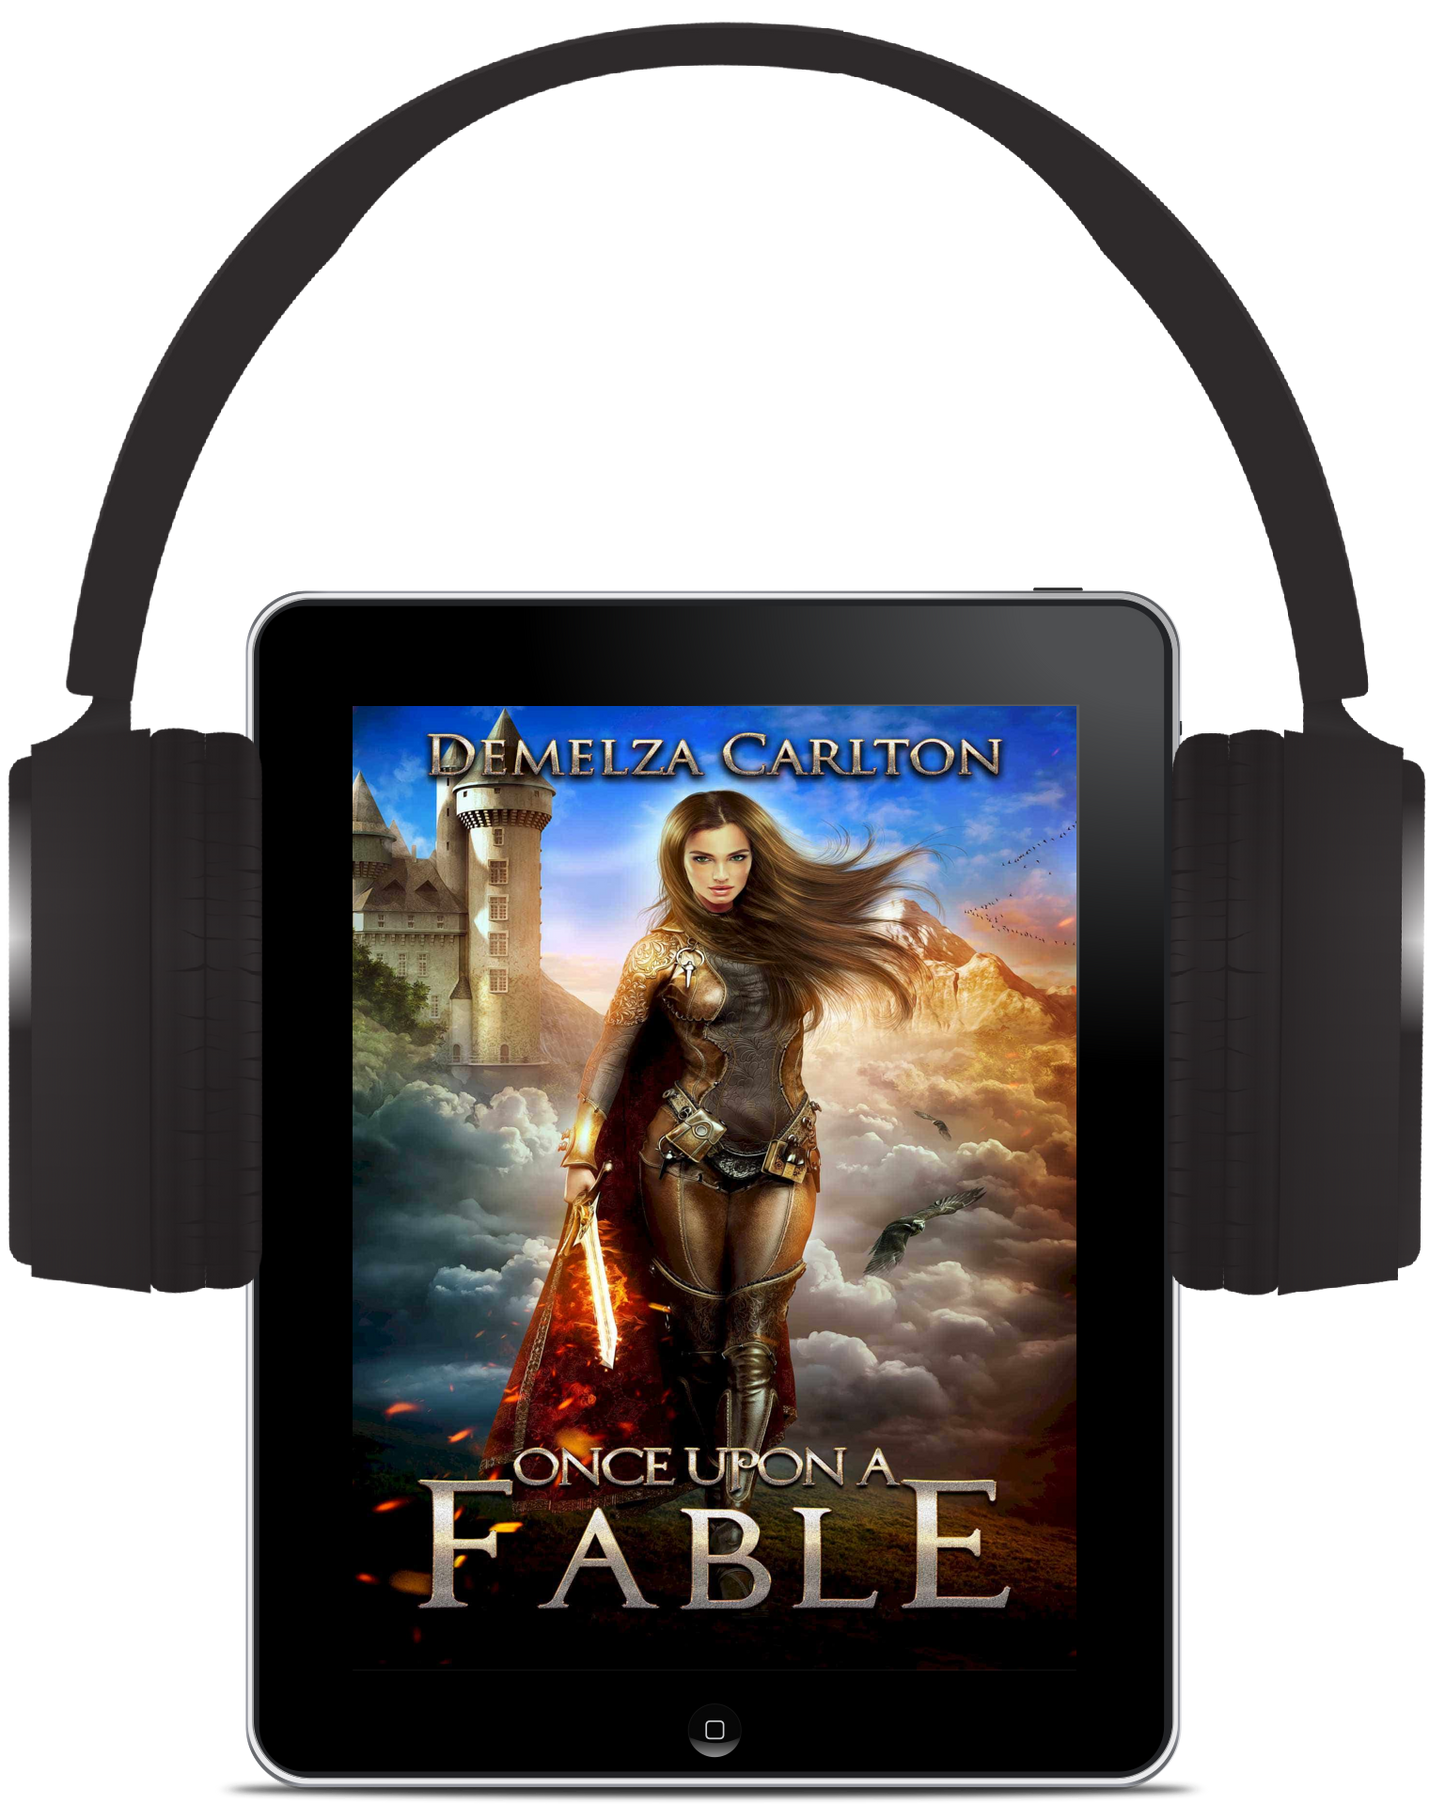 Once Upon a Fable (Book 16-18 in the Romance a Medieval Fairytale series) AUDIOBOOK